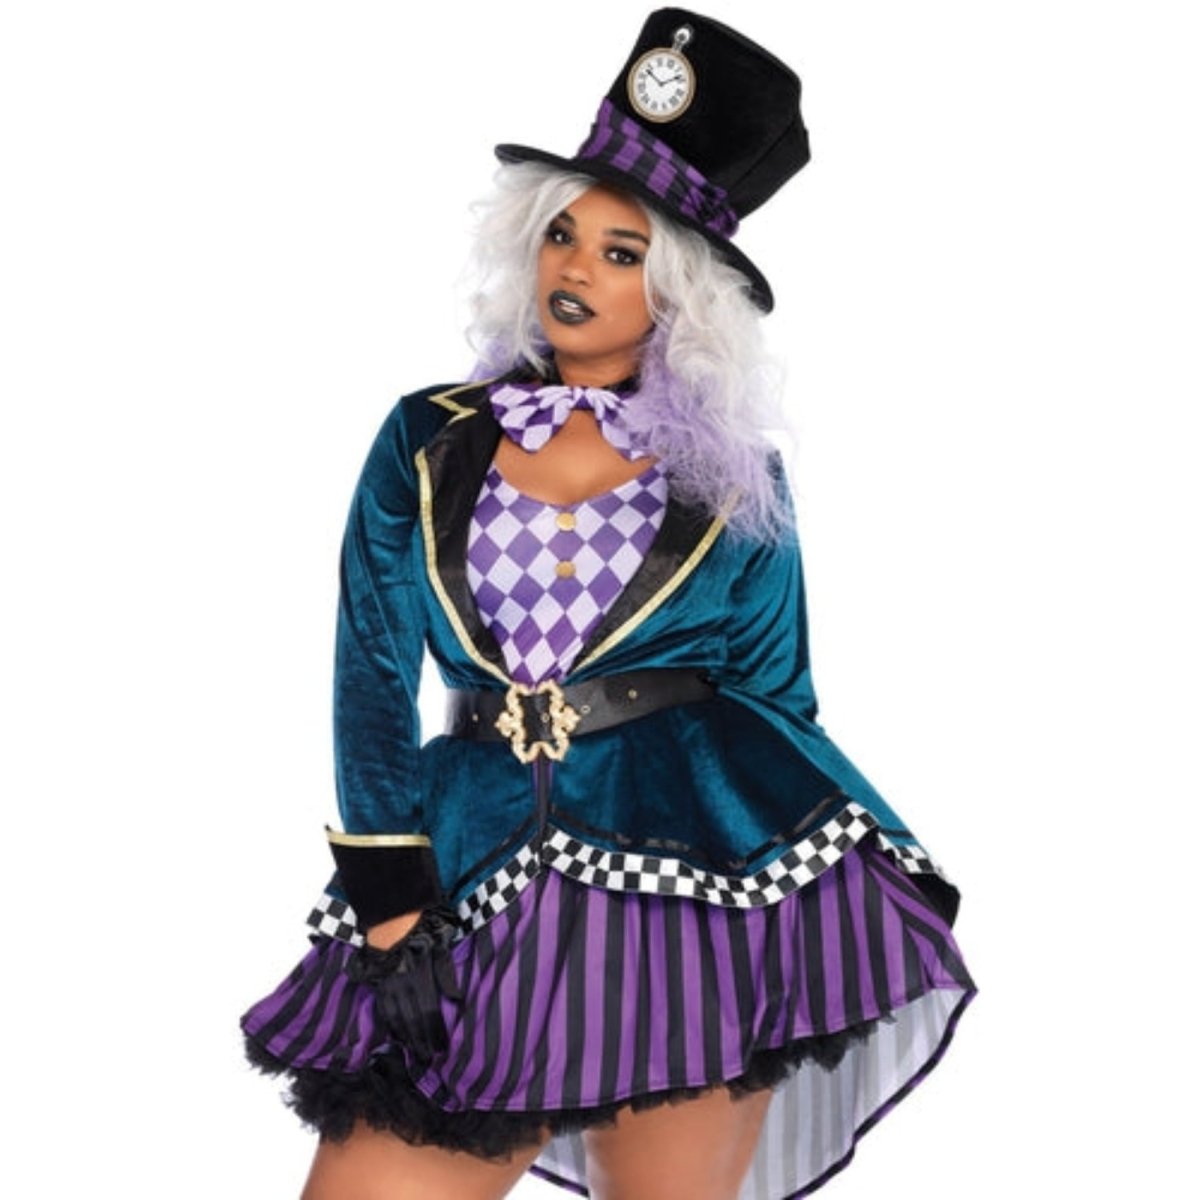 Mad Hatter Costume Female DLY - worldclasscostumes